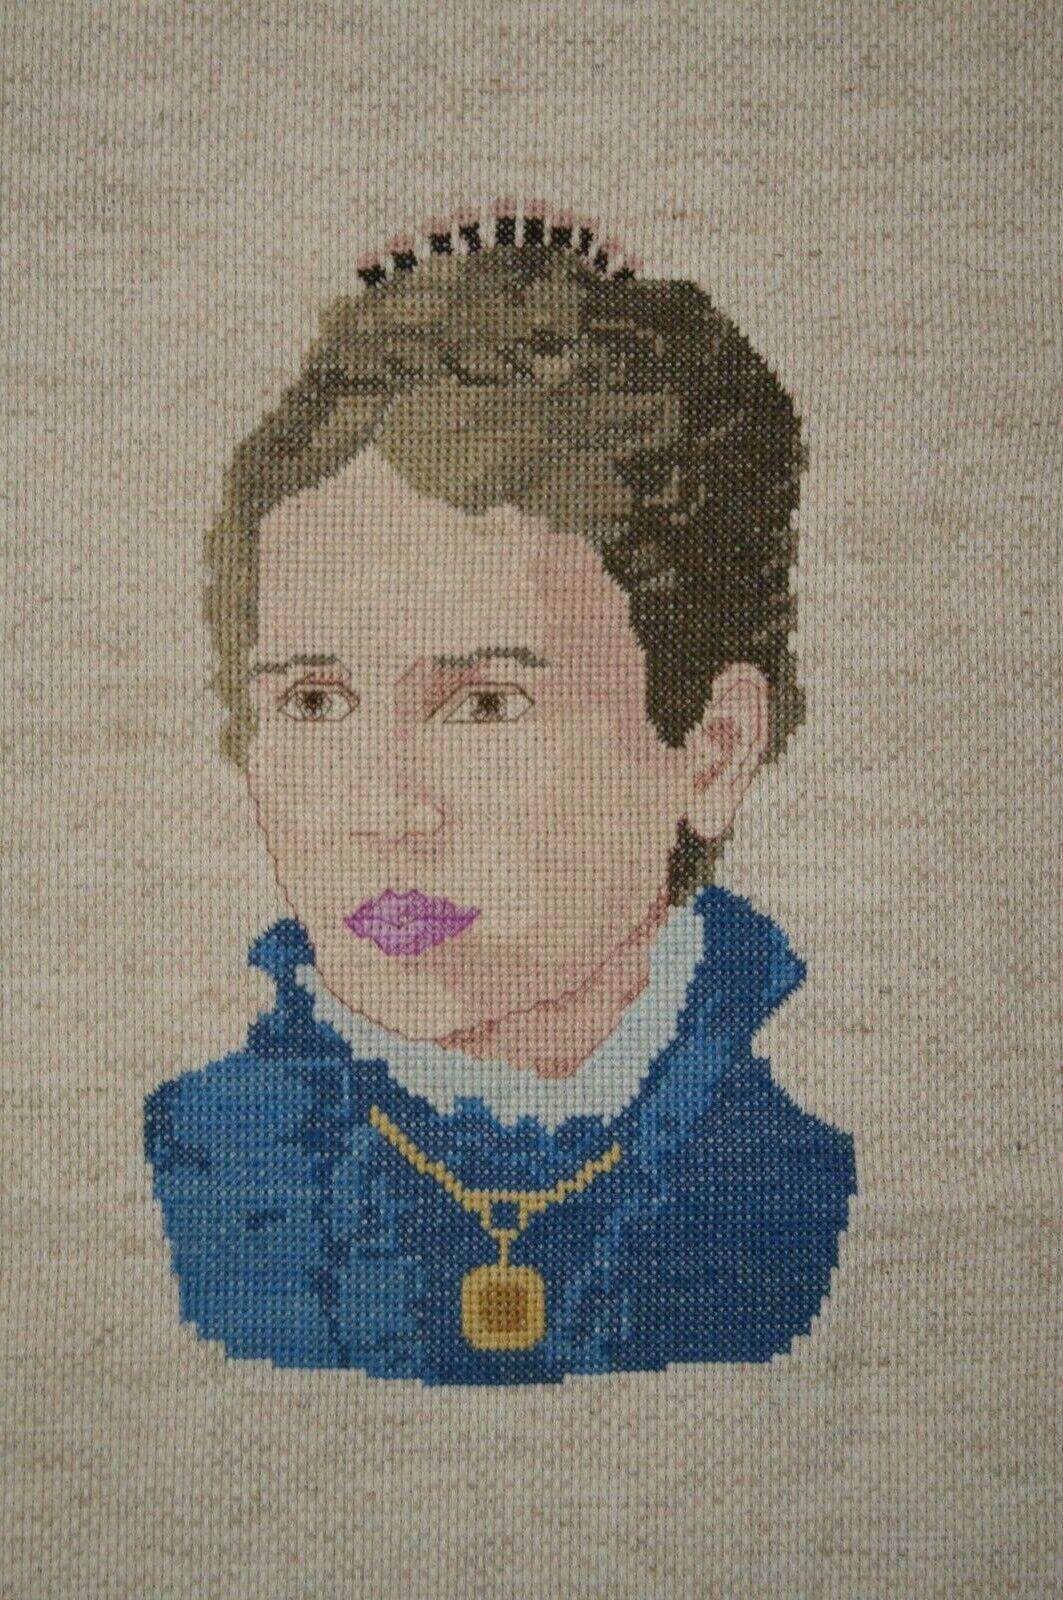 Completed Cross Stitch Womans Portrait Blue Shirt Brown Hair Necklace